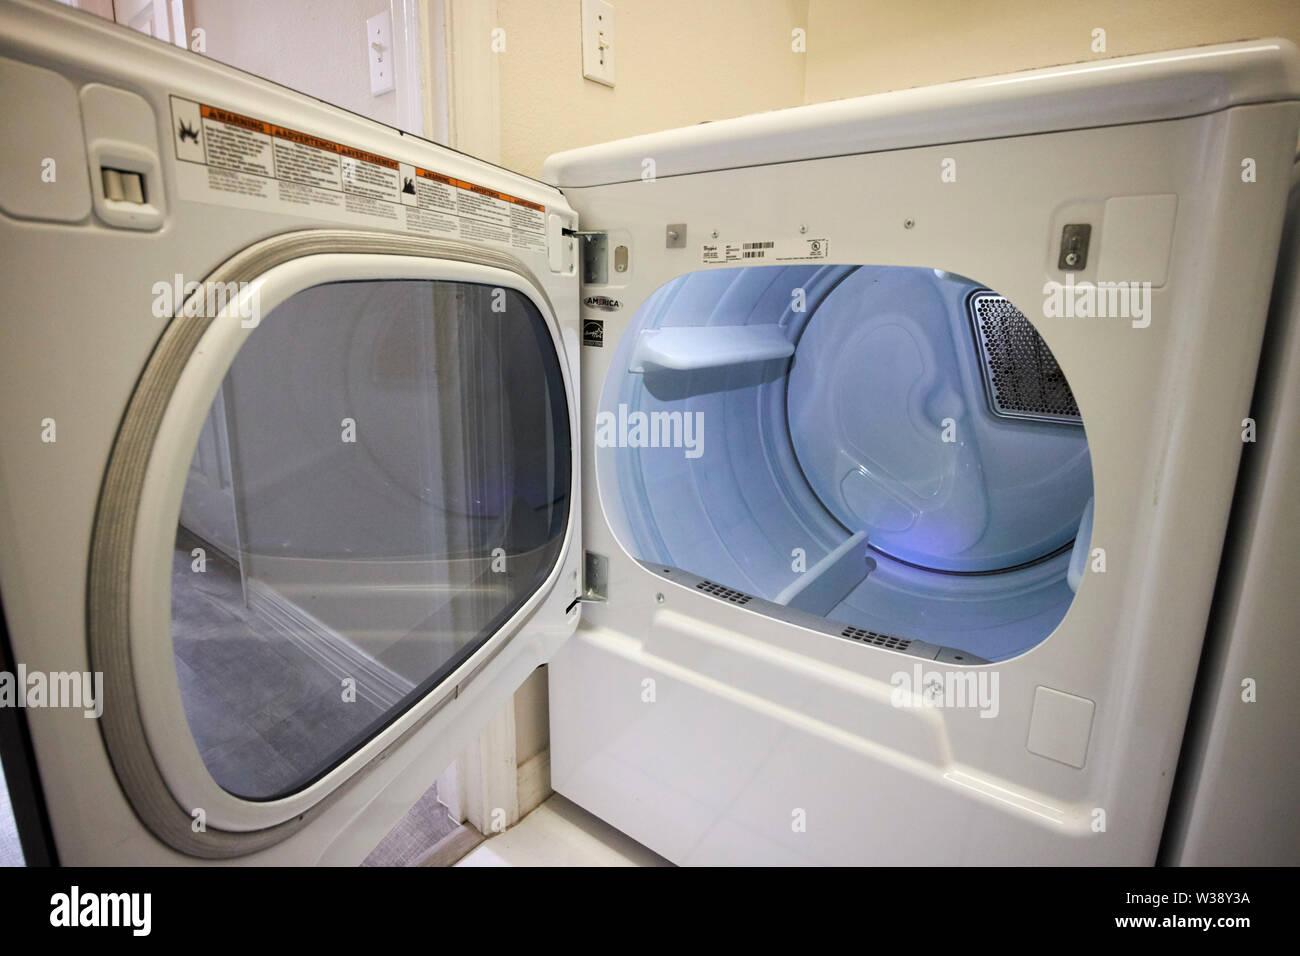 open door and empty drum of a tumble dryer in the laundry room of a home in the USA United States of America Stock Photo